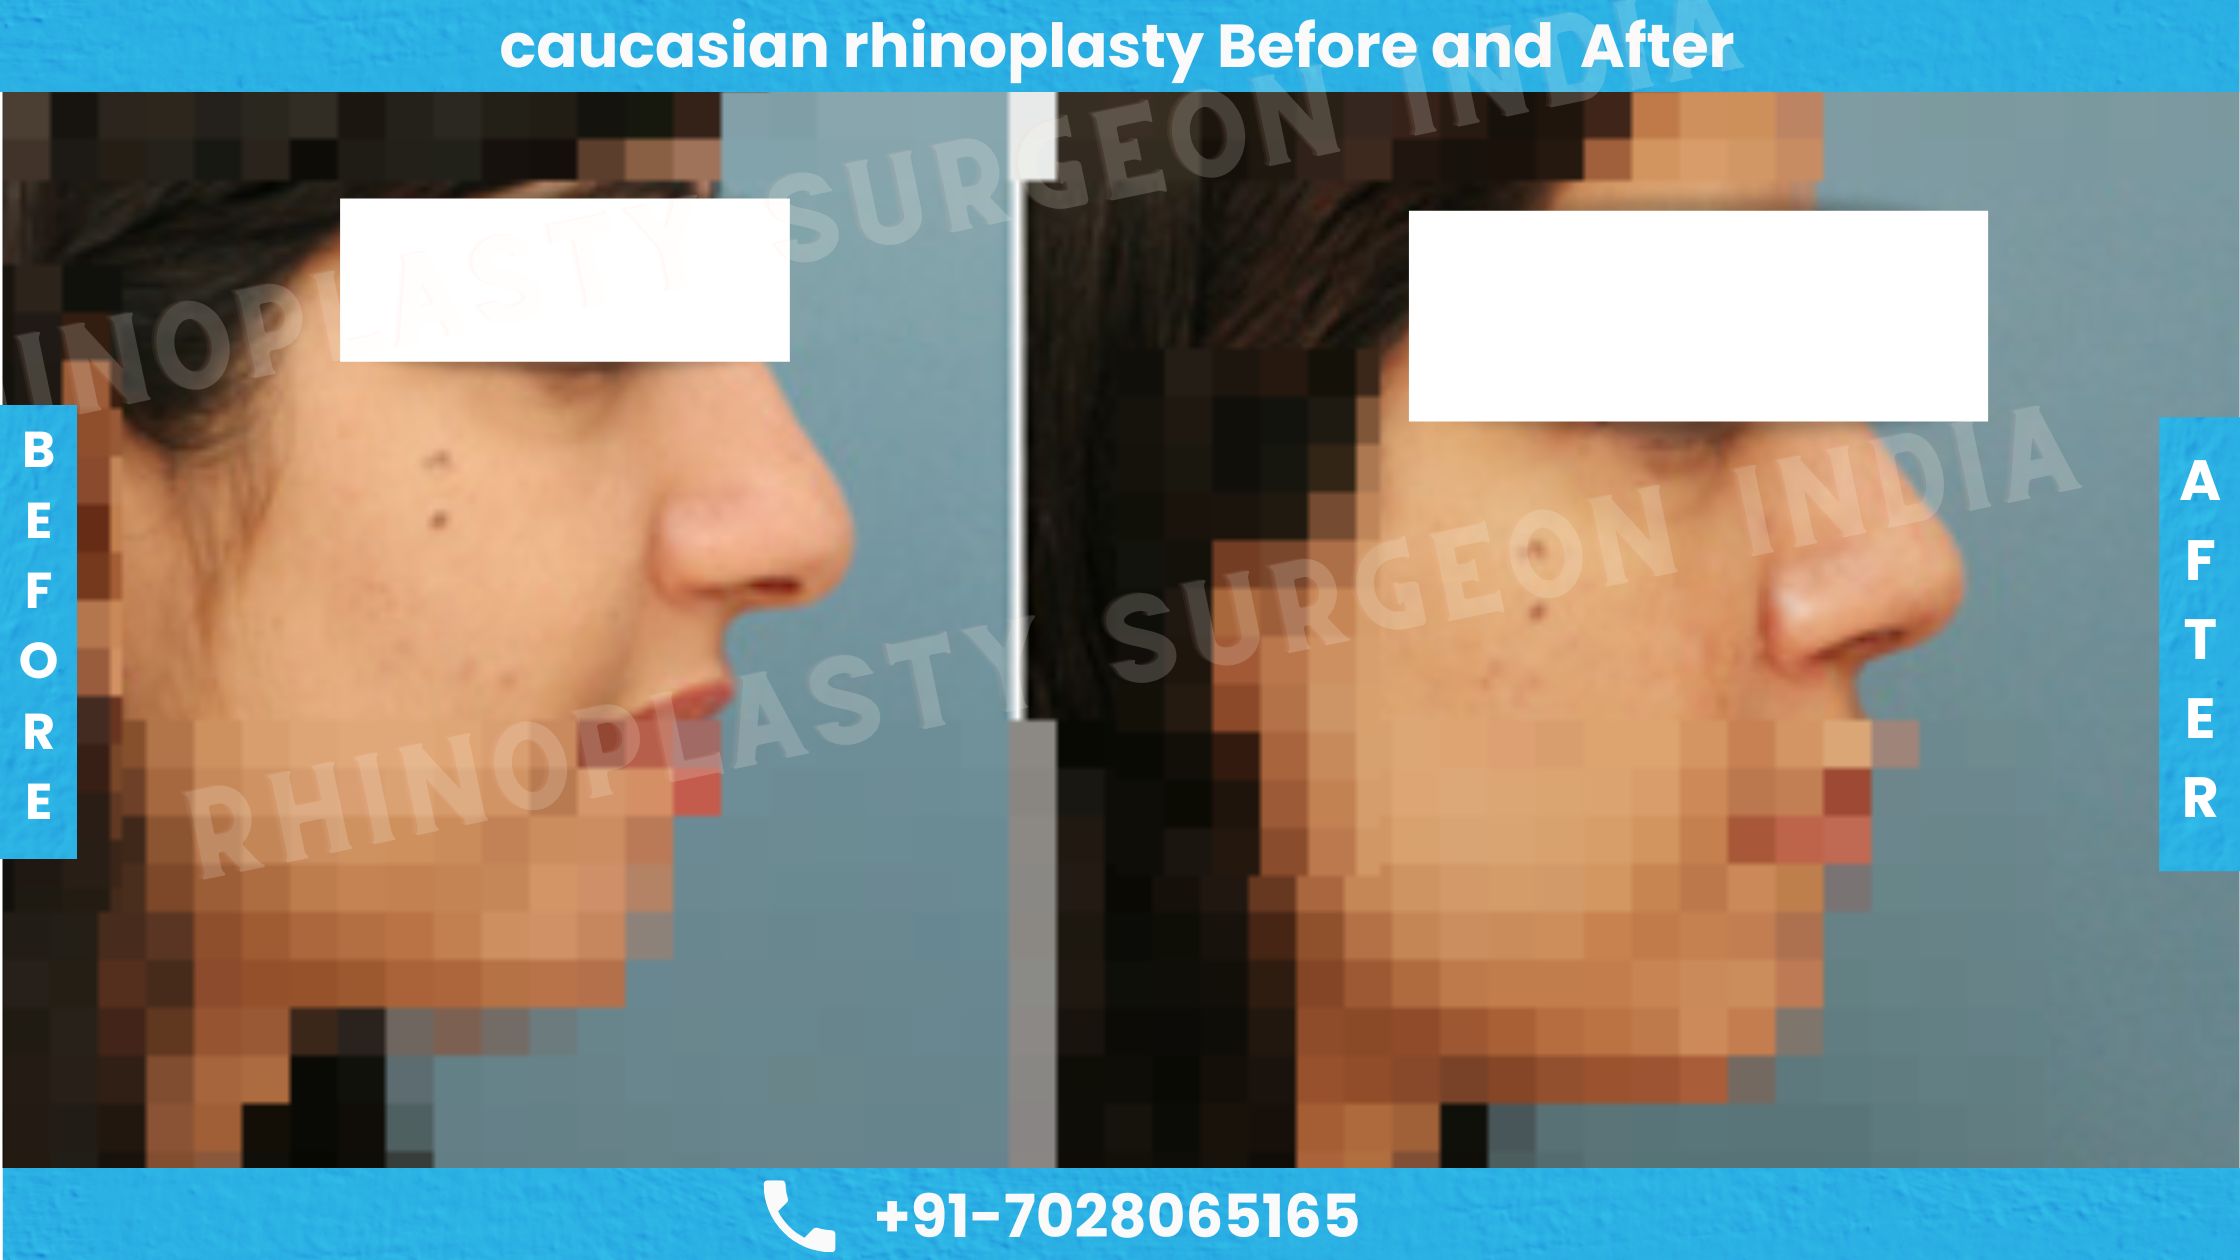 Before and After Photos of Caucasian Rhinoplasty Treatment-